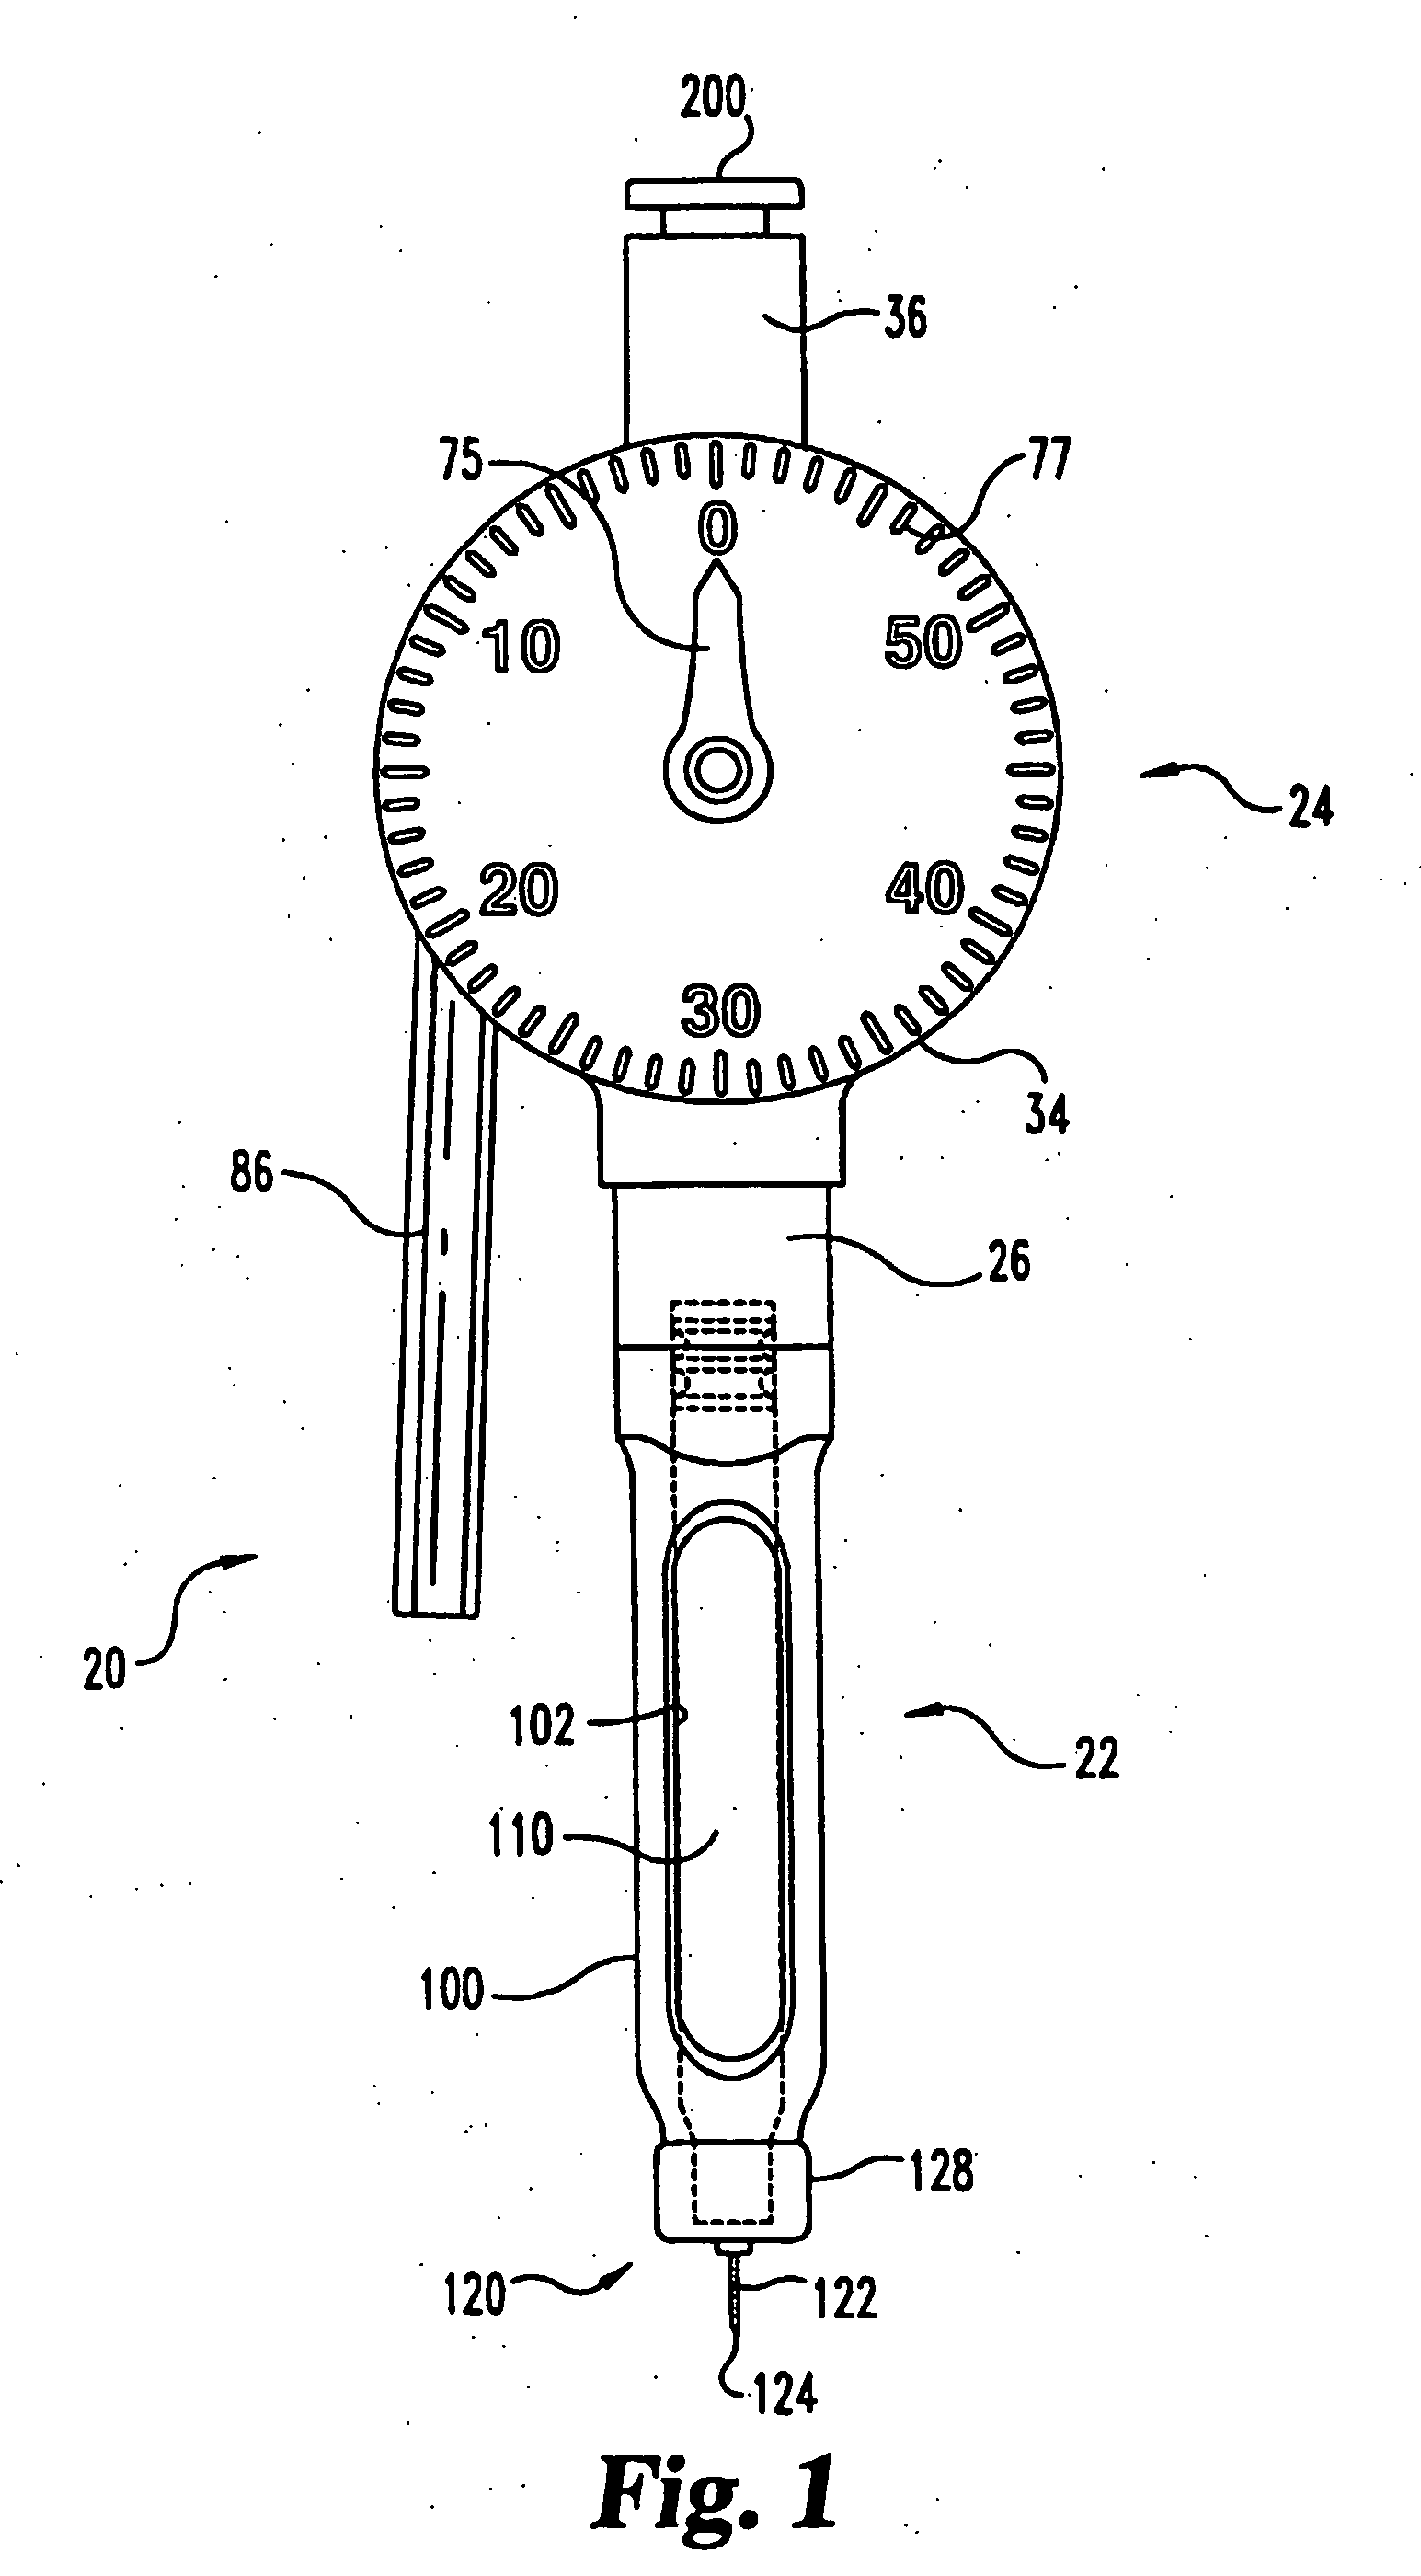 Medication dispensing apparatus with squeezable actuator